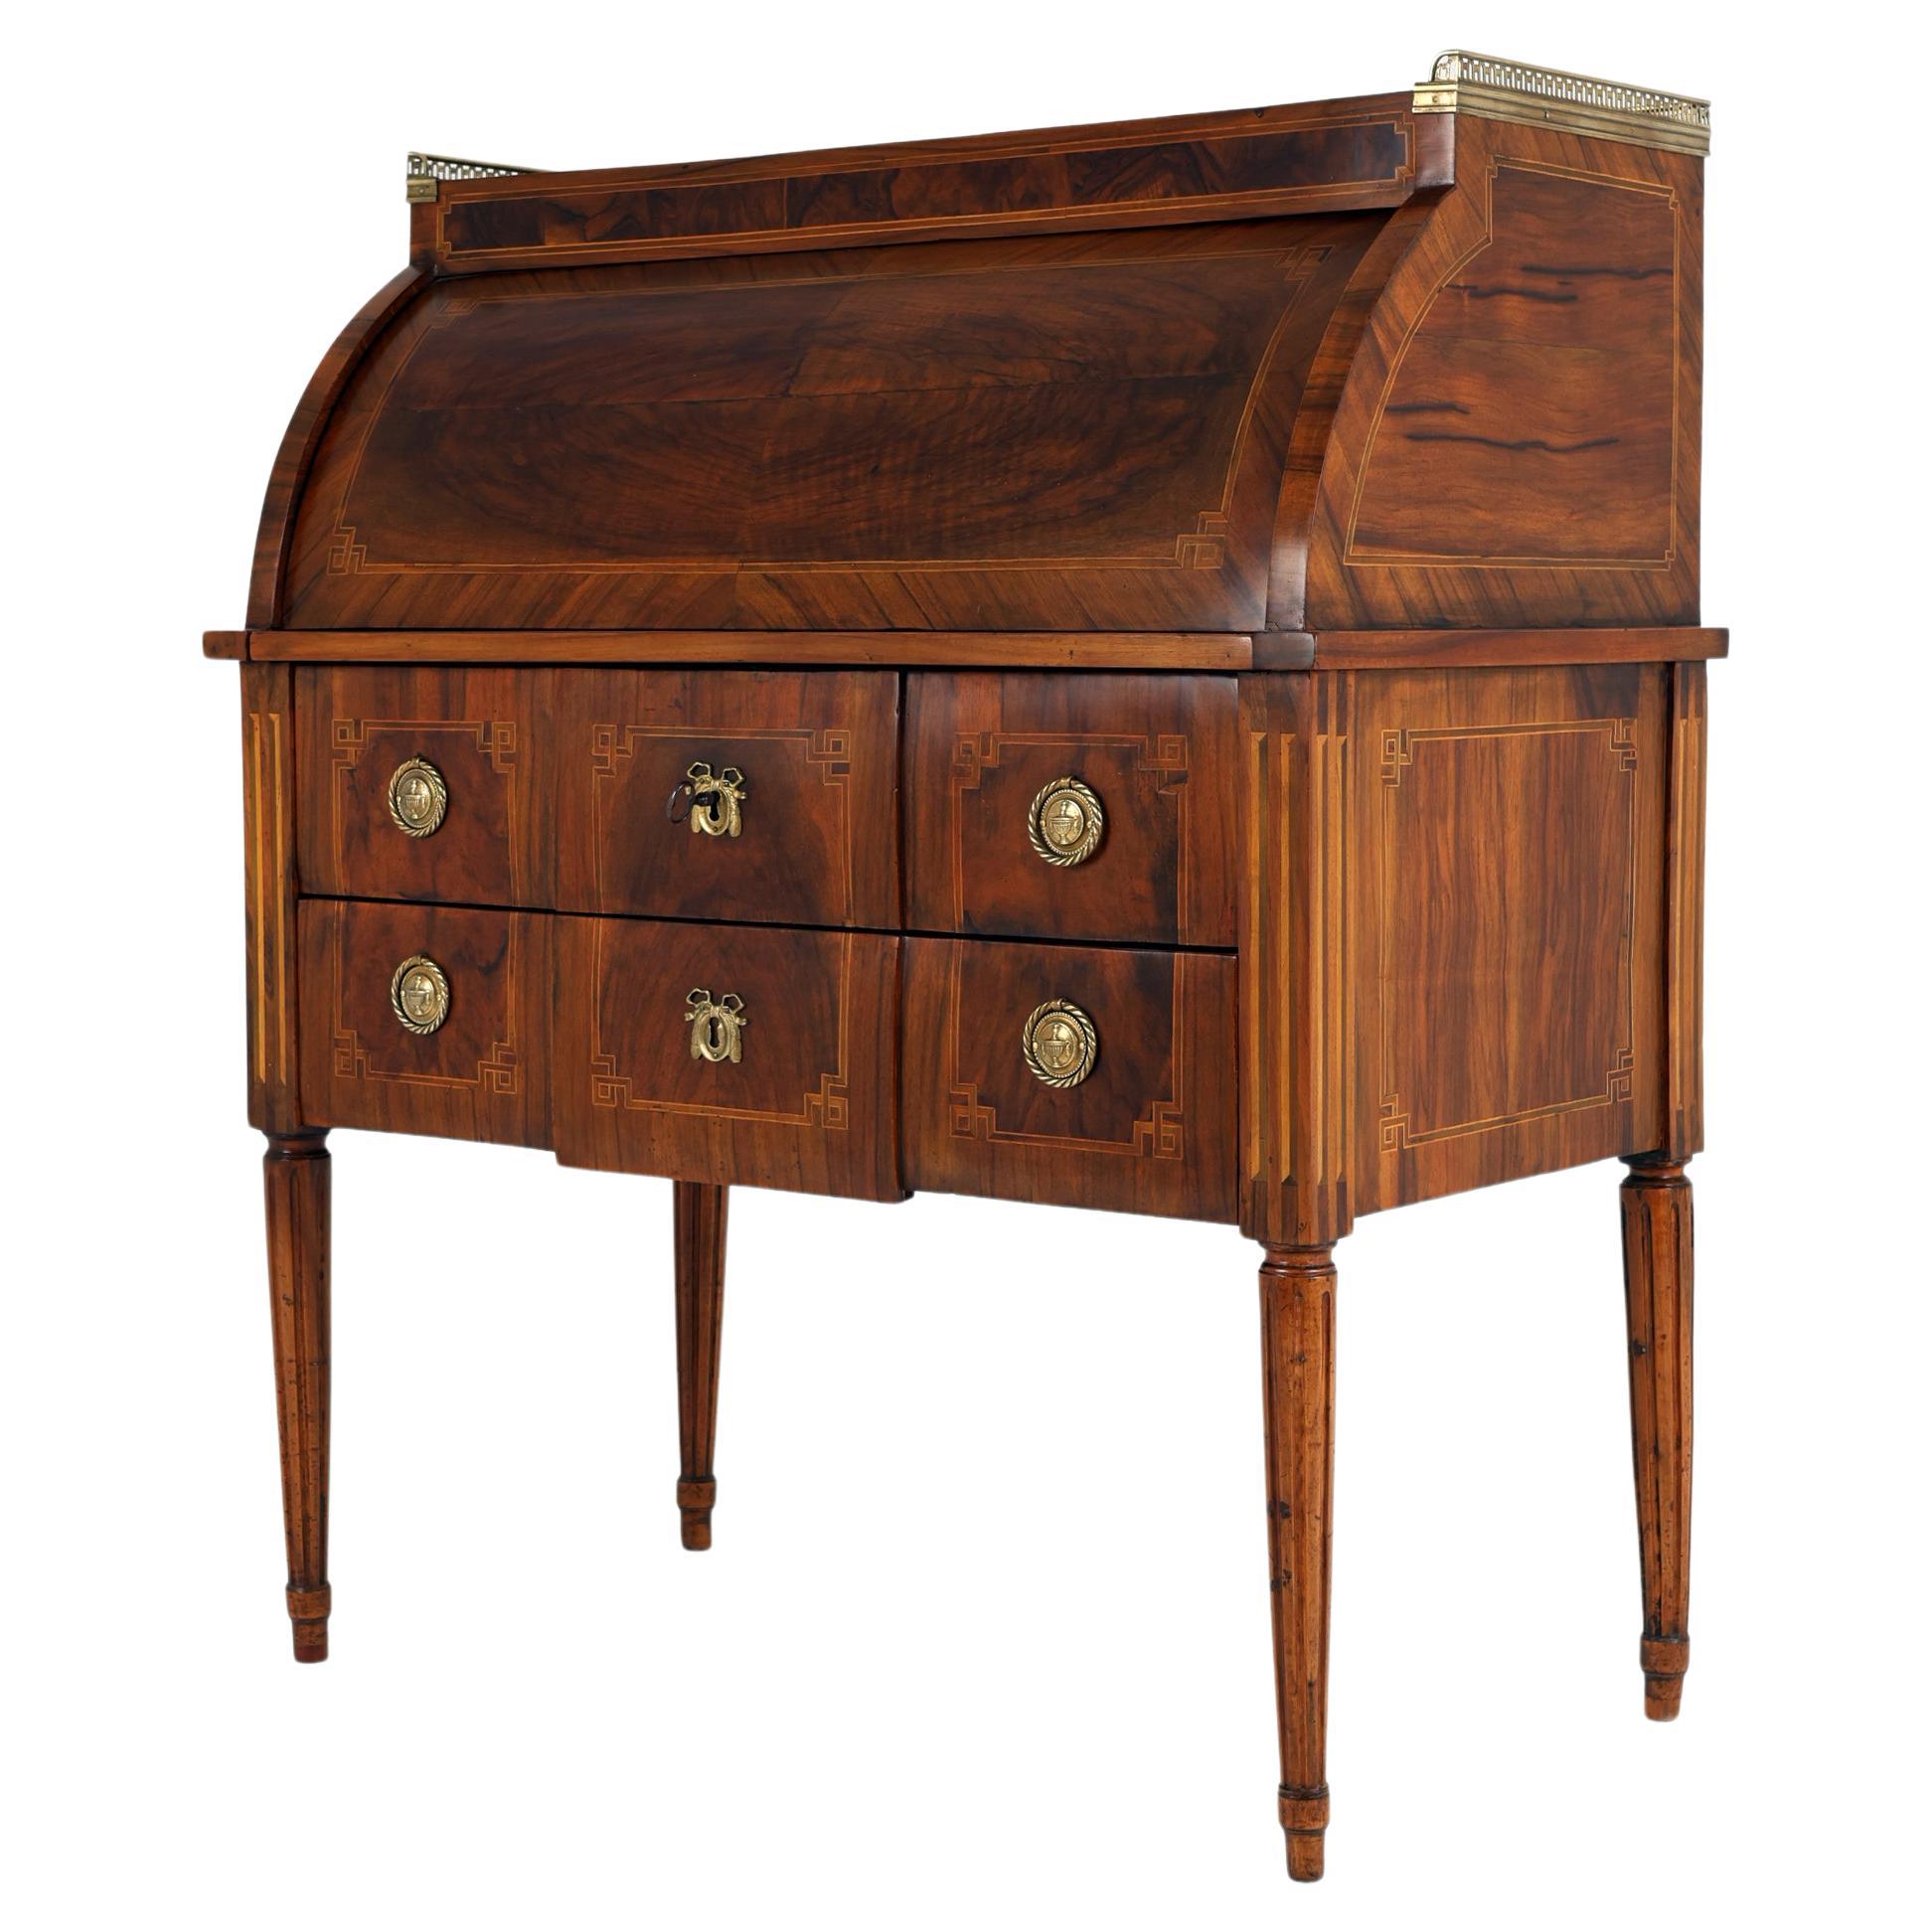 Late 18th Century Cylinder Desk with beautiful Patina,
1800, France

Cylinder desk with straight sides, closed in the upper part with a semi-circular flap, with two drawers. The whole rests on angular legs, richly veneered with with beautiful walnut